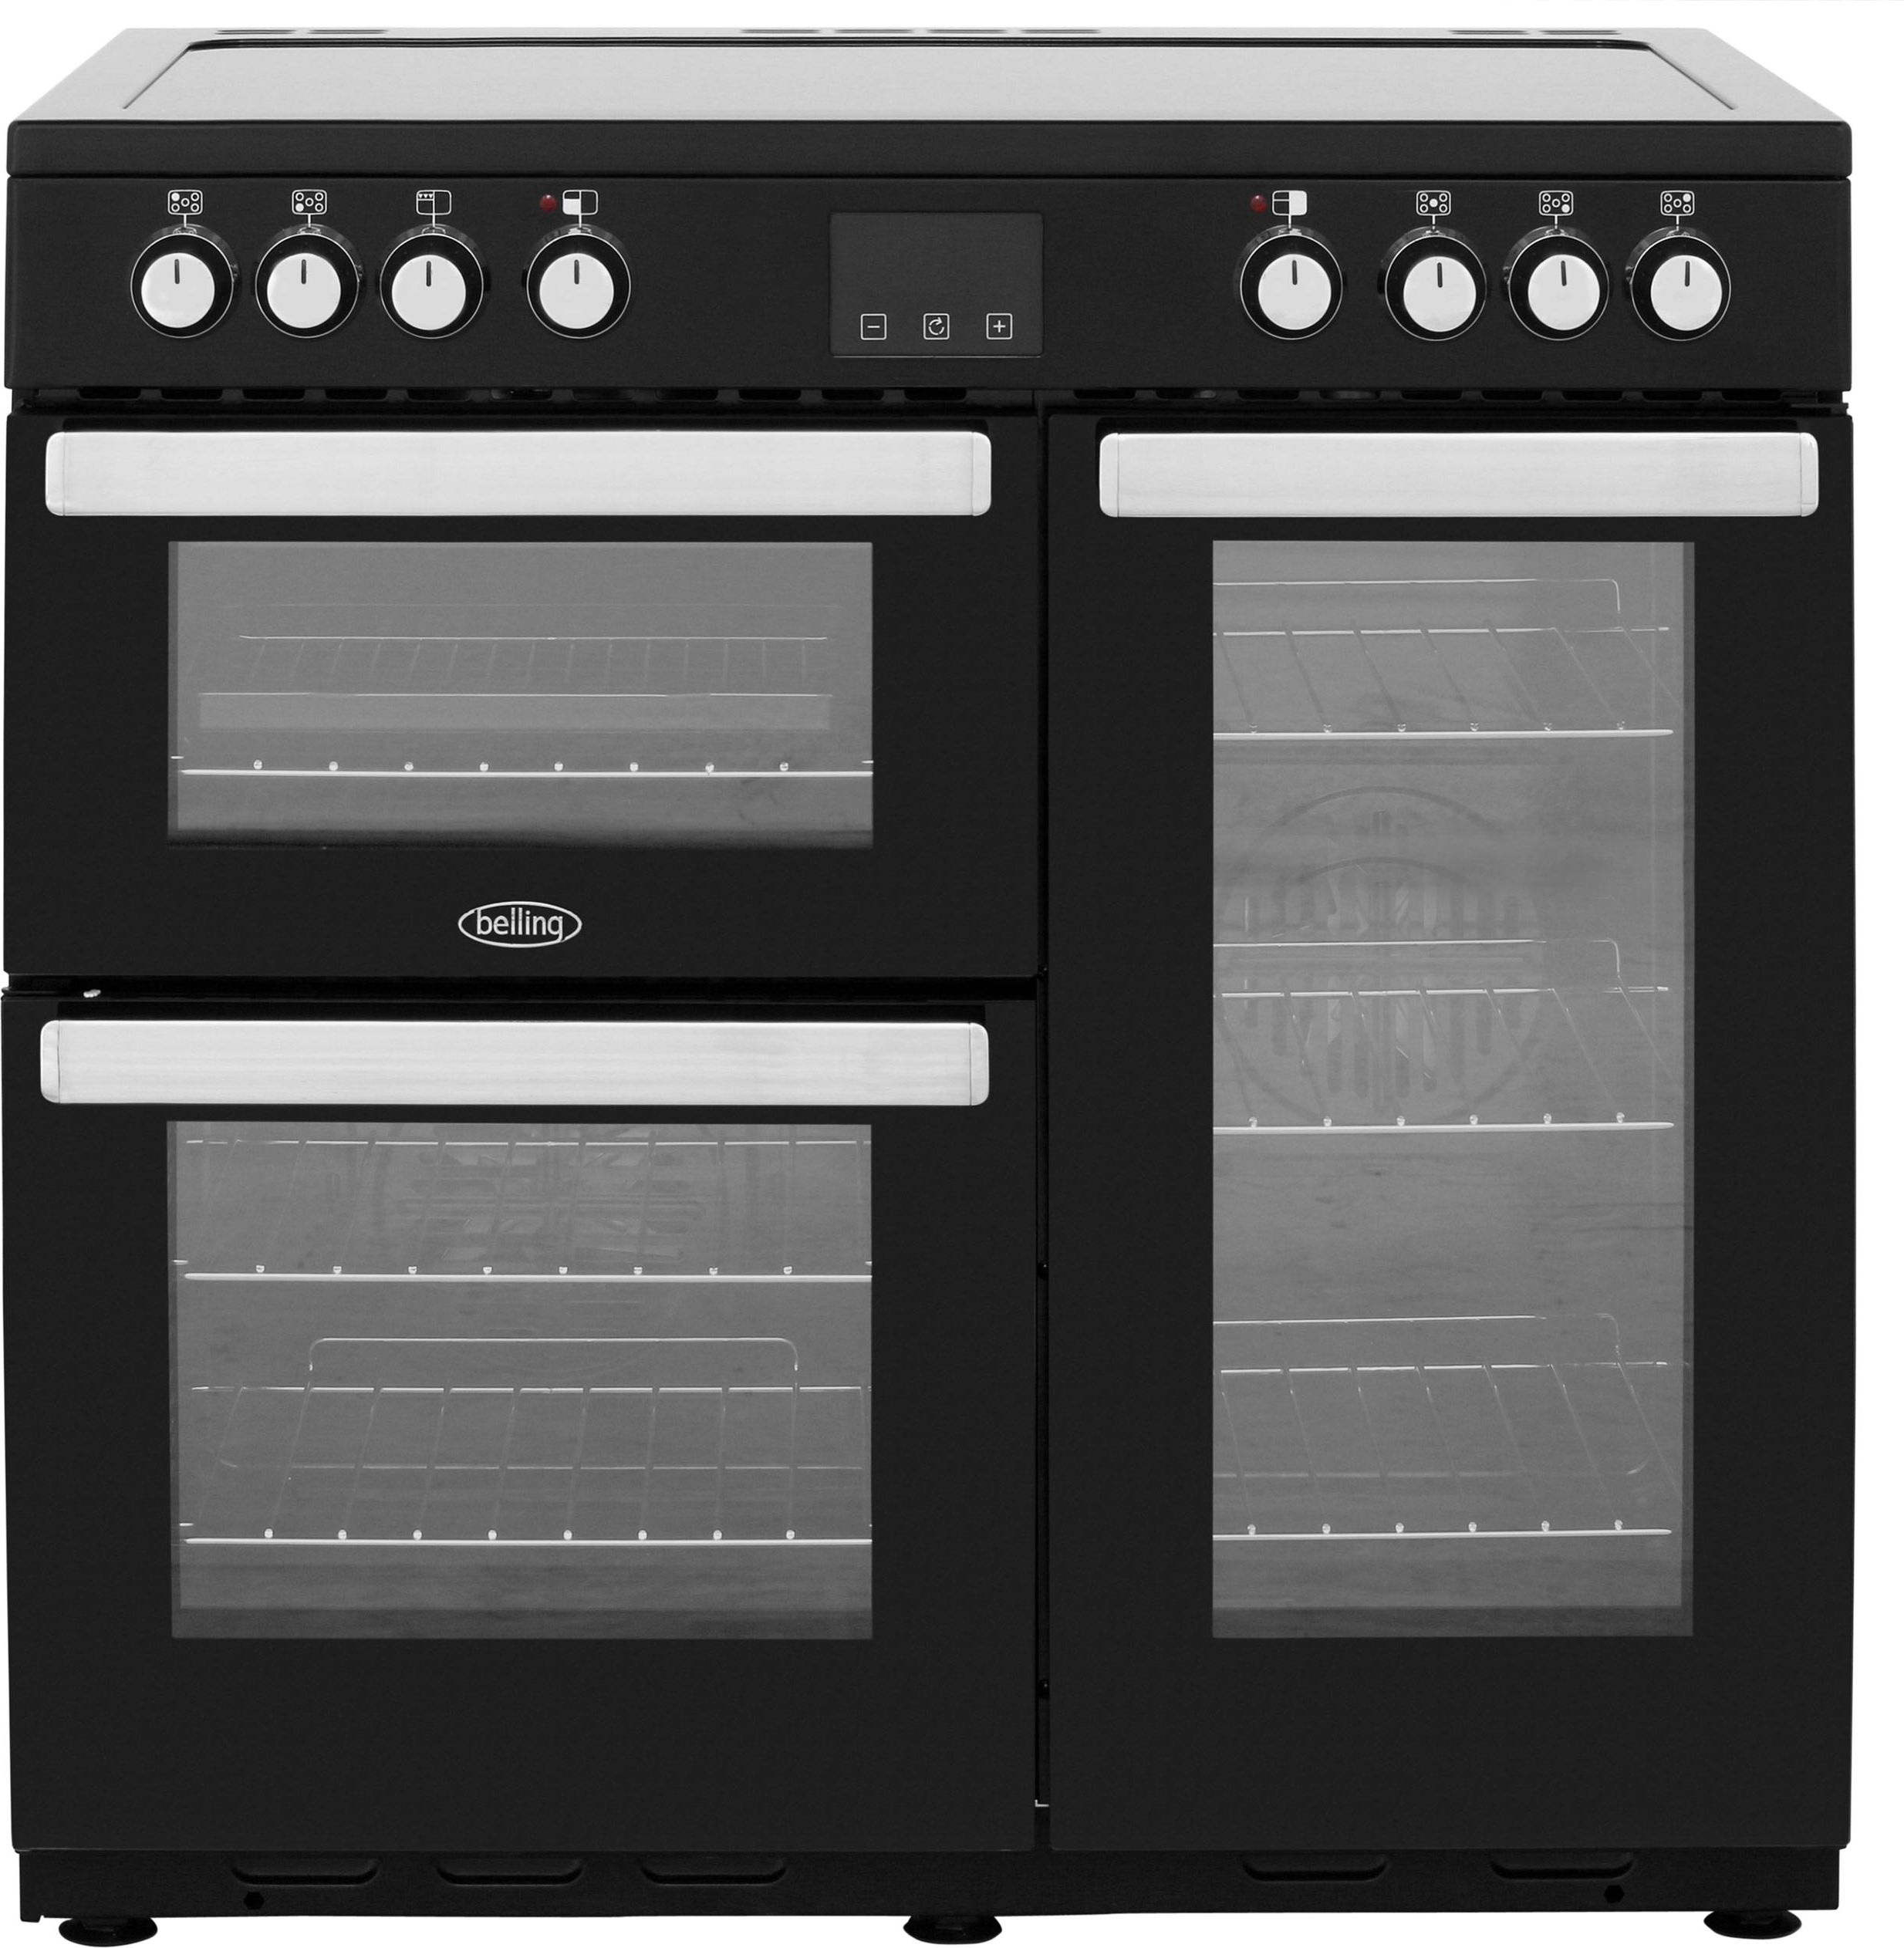 Belling Cookcentre90E 90cm Electric Range Cooker with Ceramic Hob - Black - A/A Rated, Black